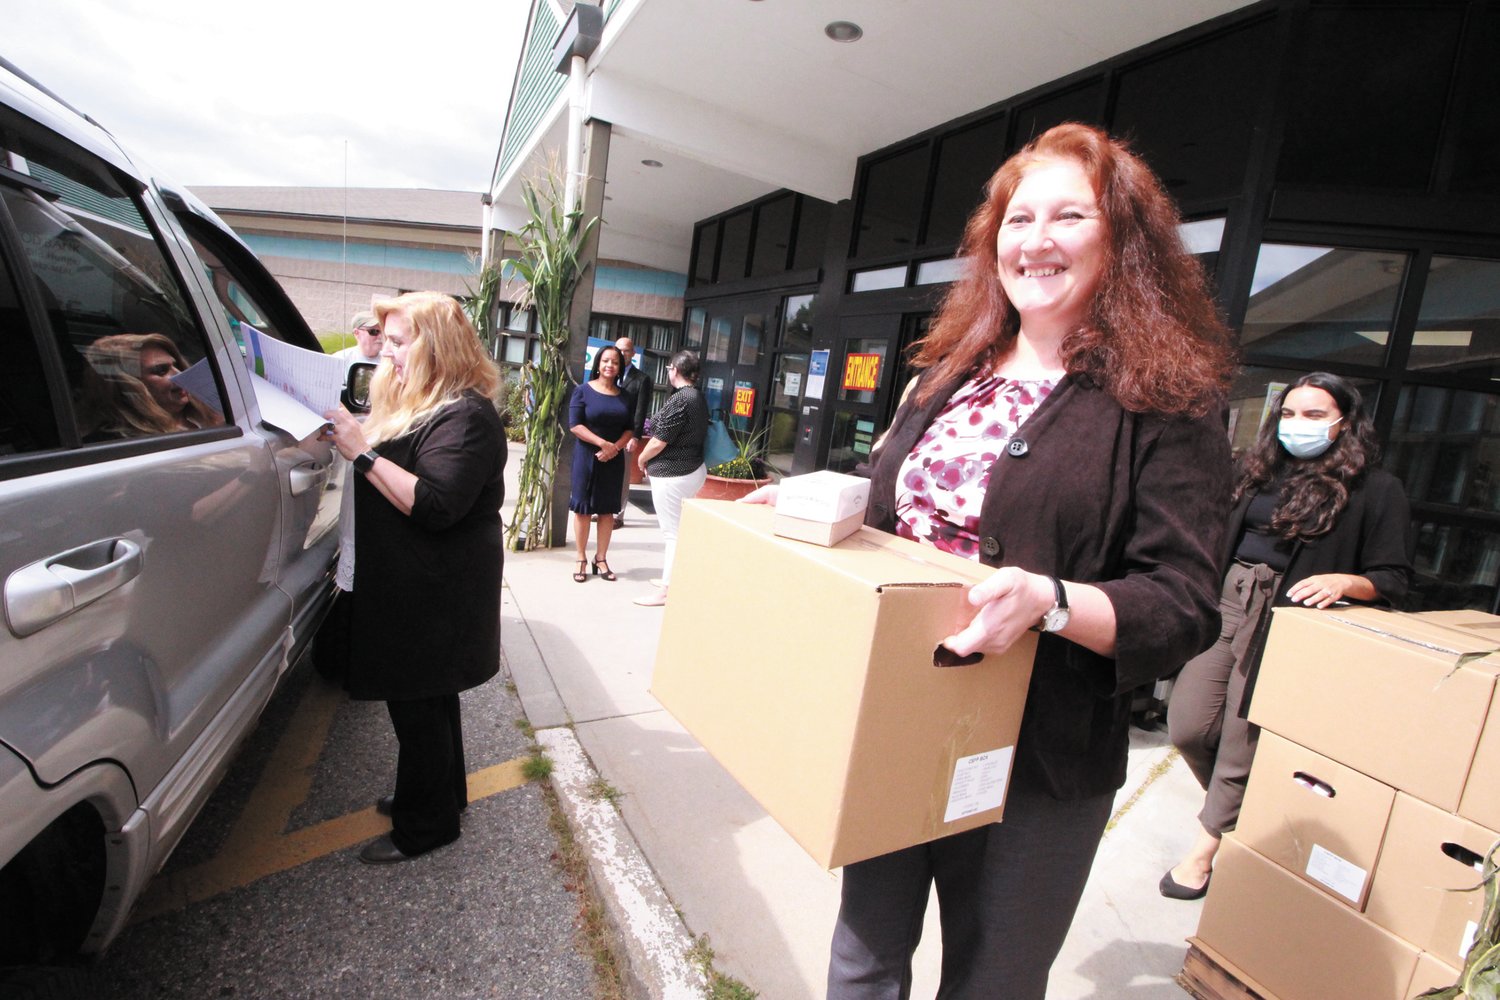 AT SENIOR CENTER PICKUP:  Maria Cimini, director of the Healthy Aging, hoists a box during the monthly pickup held last week as Patricia Almonte, who coordinates the center program, takes information from the recipient. (Warwick Beacon photos)